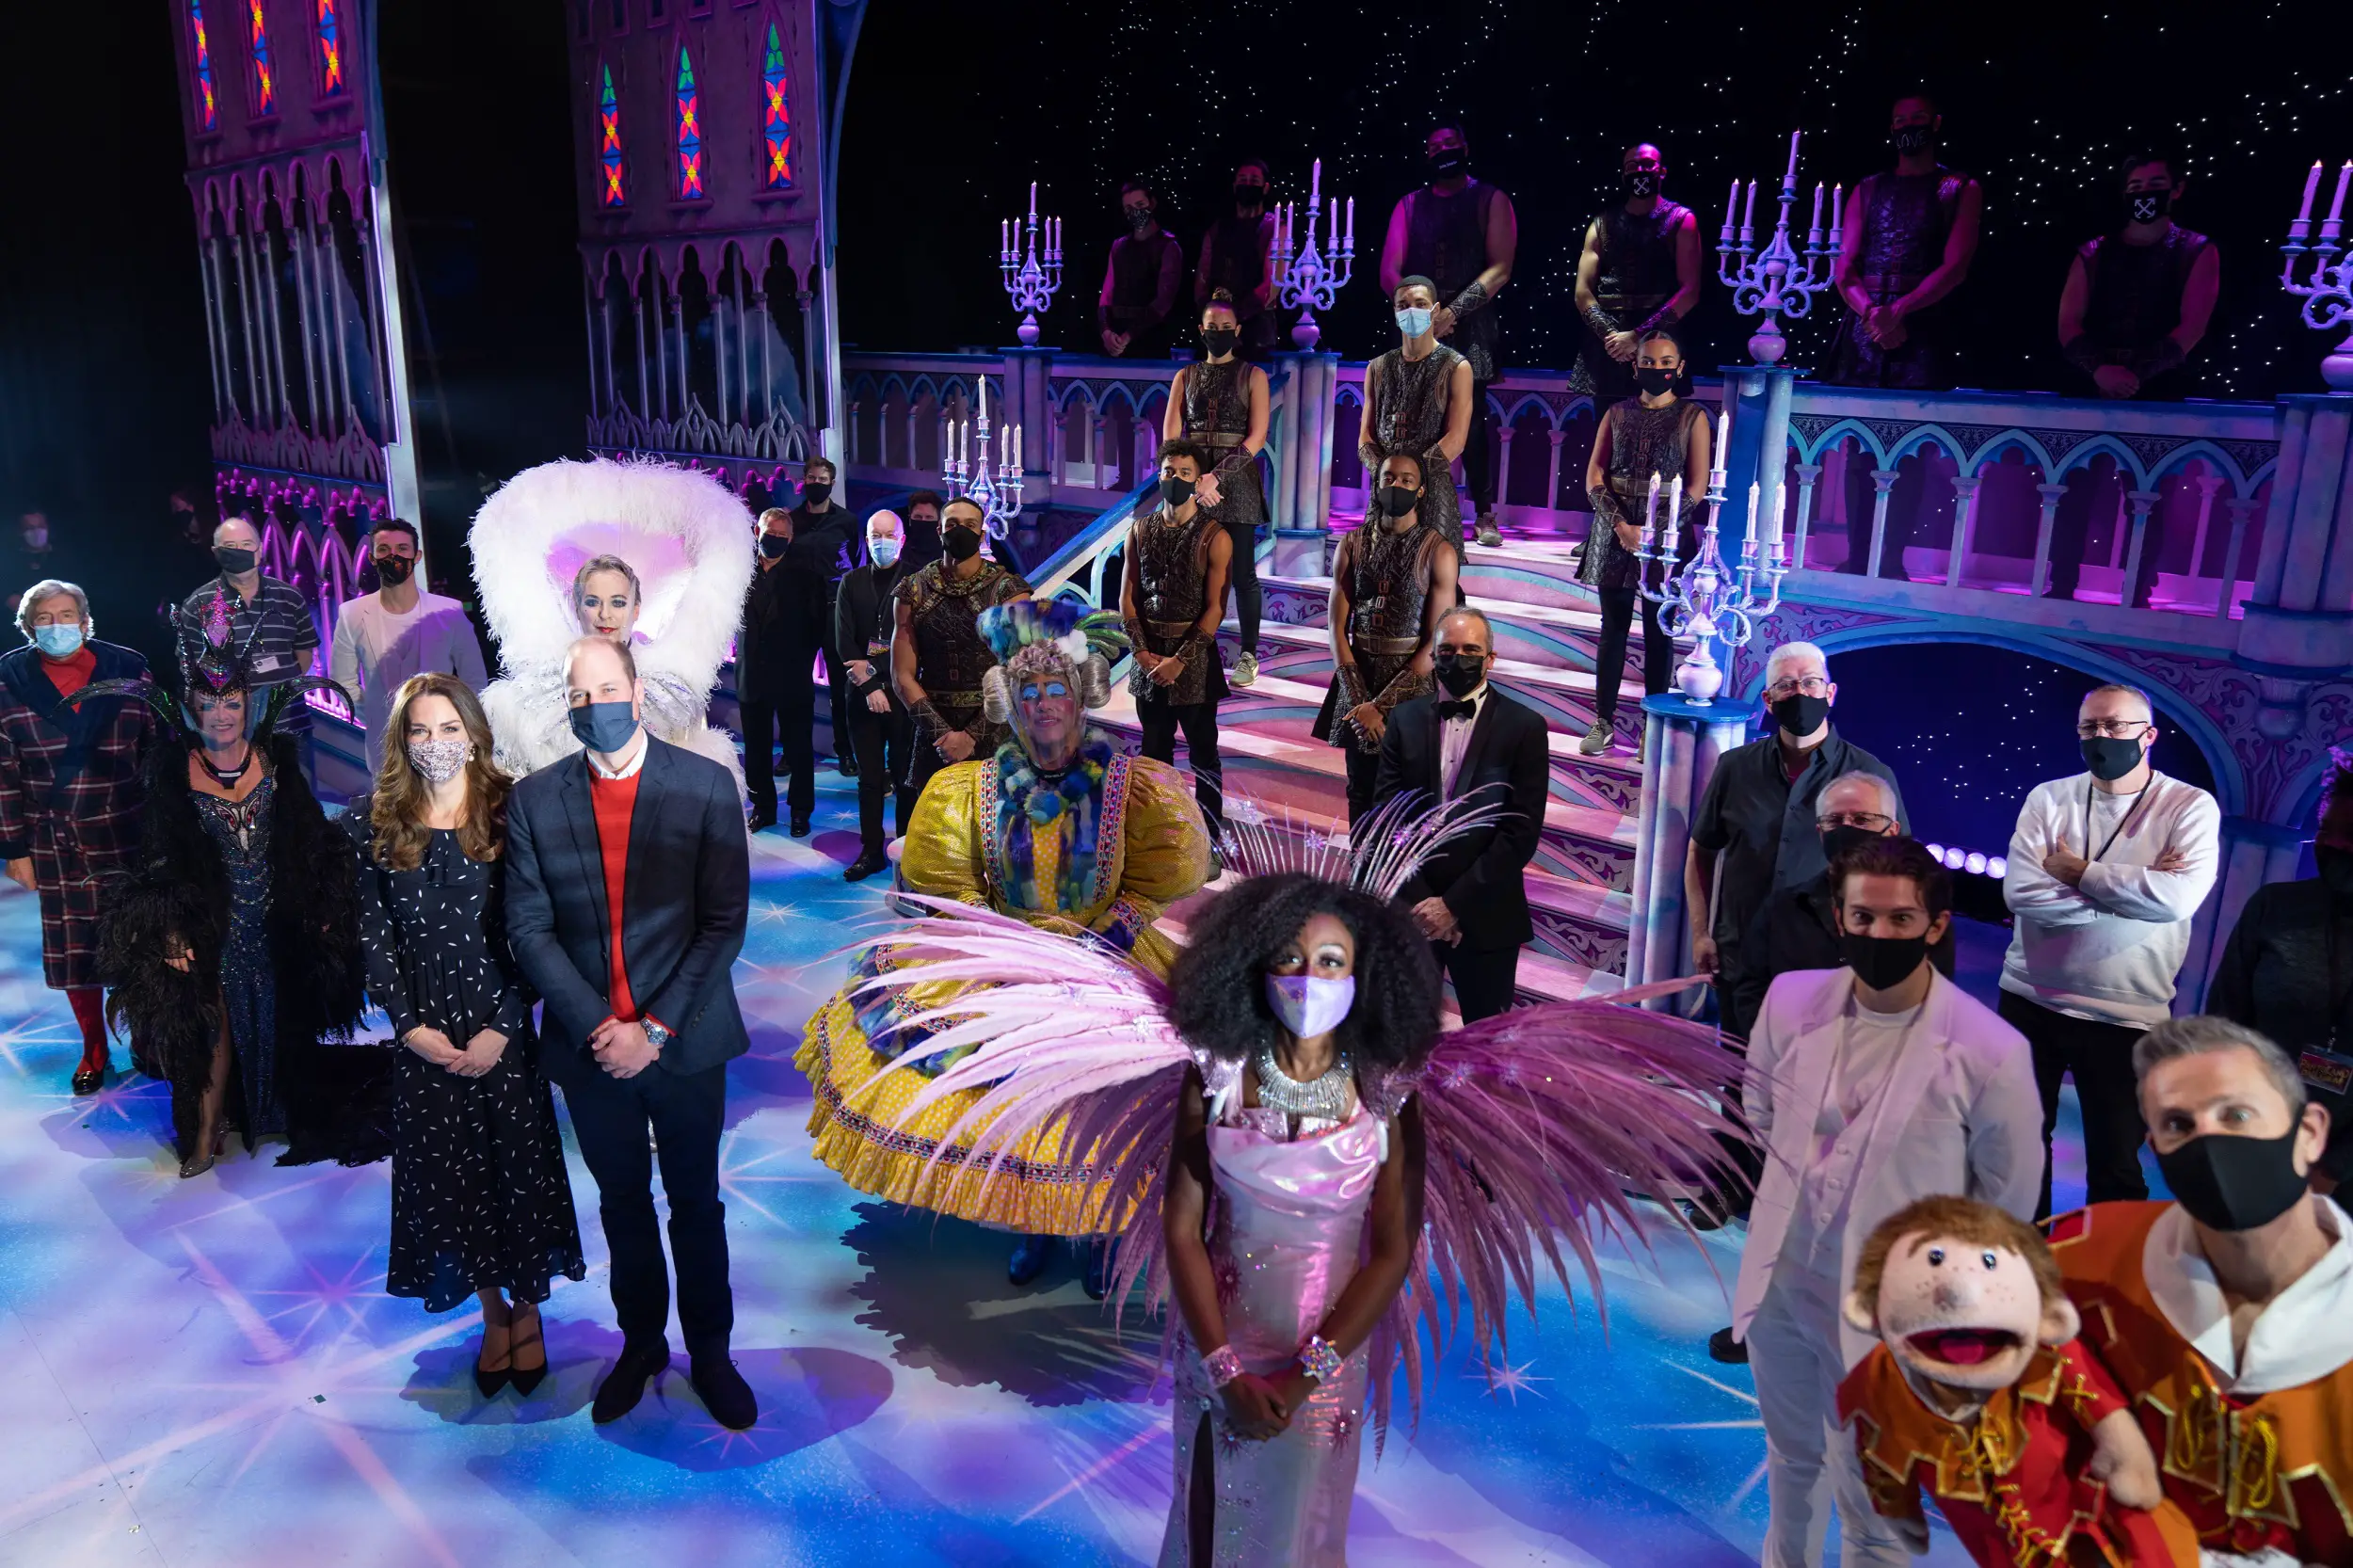 The Duke and Duchess of Cambridge attended a special performance of The National Lottery’s Pantoland at The Palladium